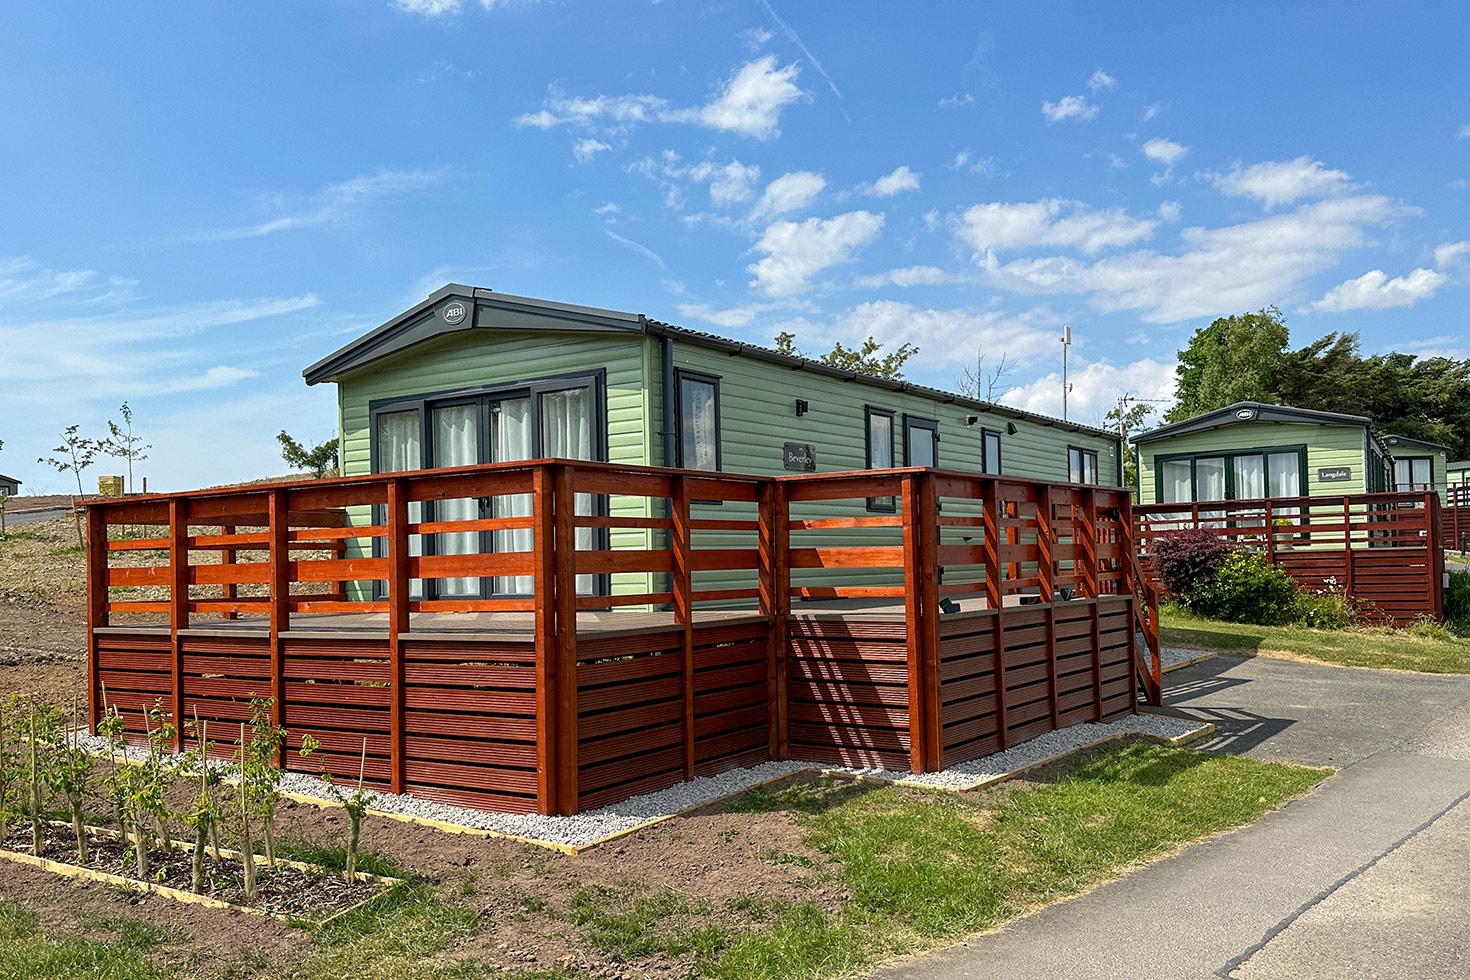 ABI Beverley 2023, brand new static caravan holiday lodge for sale Lake District